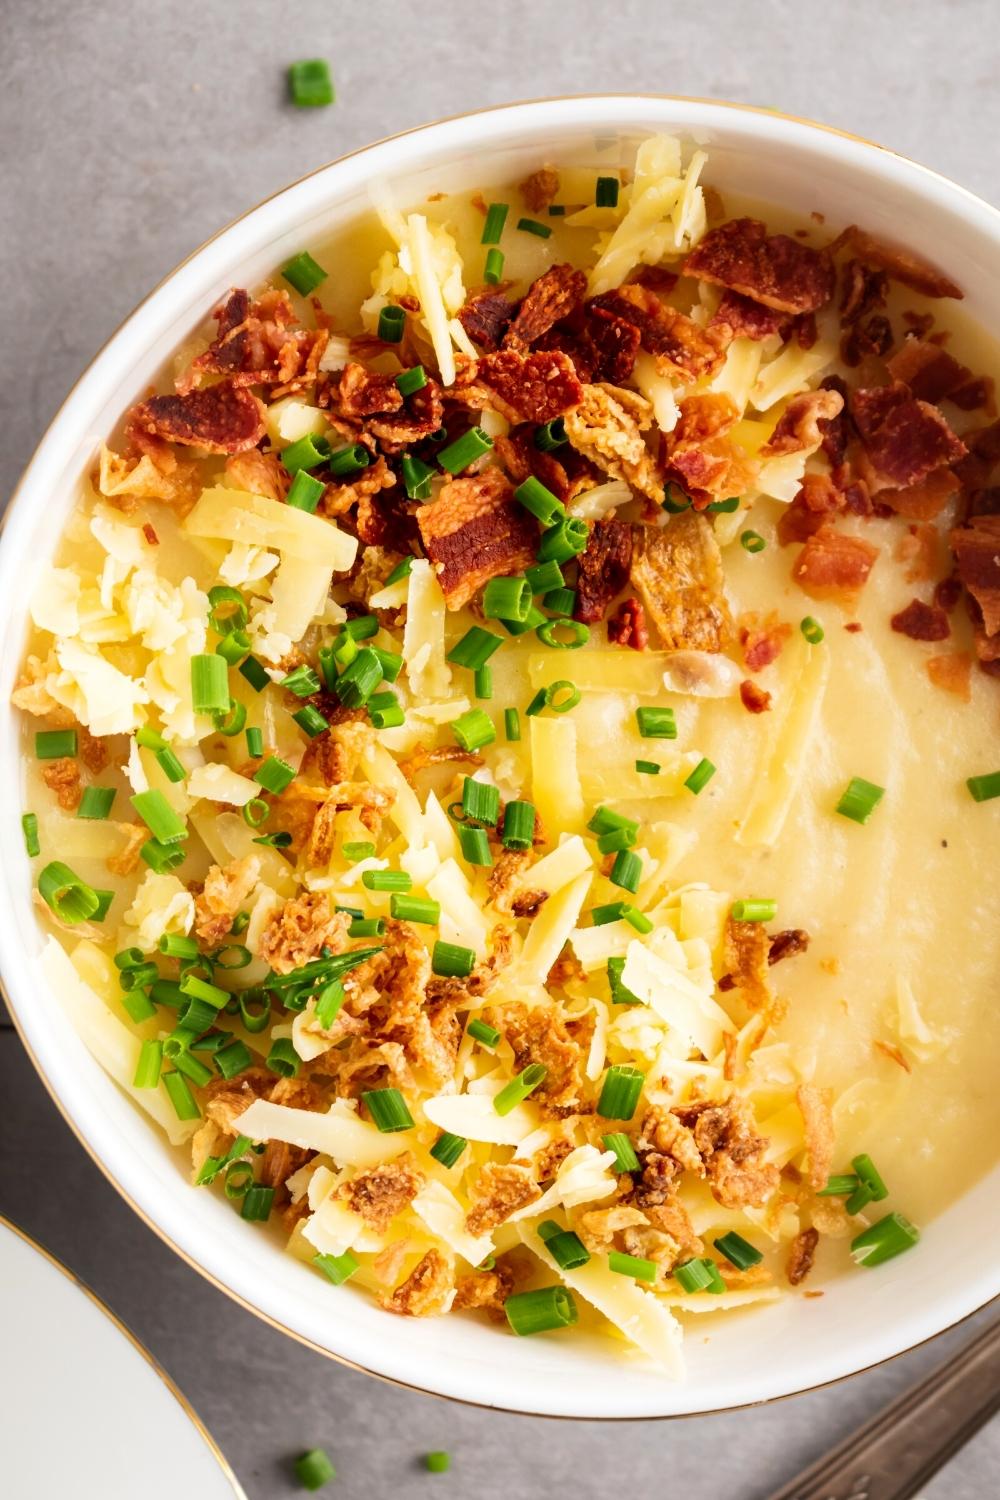 Shredded cheese, bacon bits, and crispy onions on top of potato soup in a white bowl.